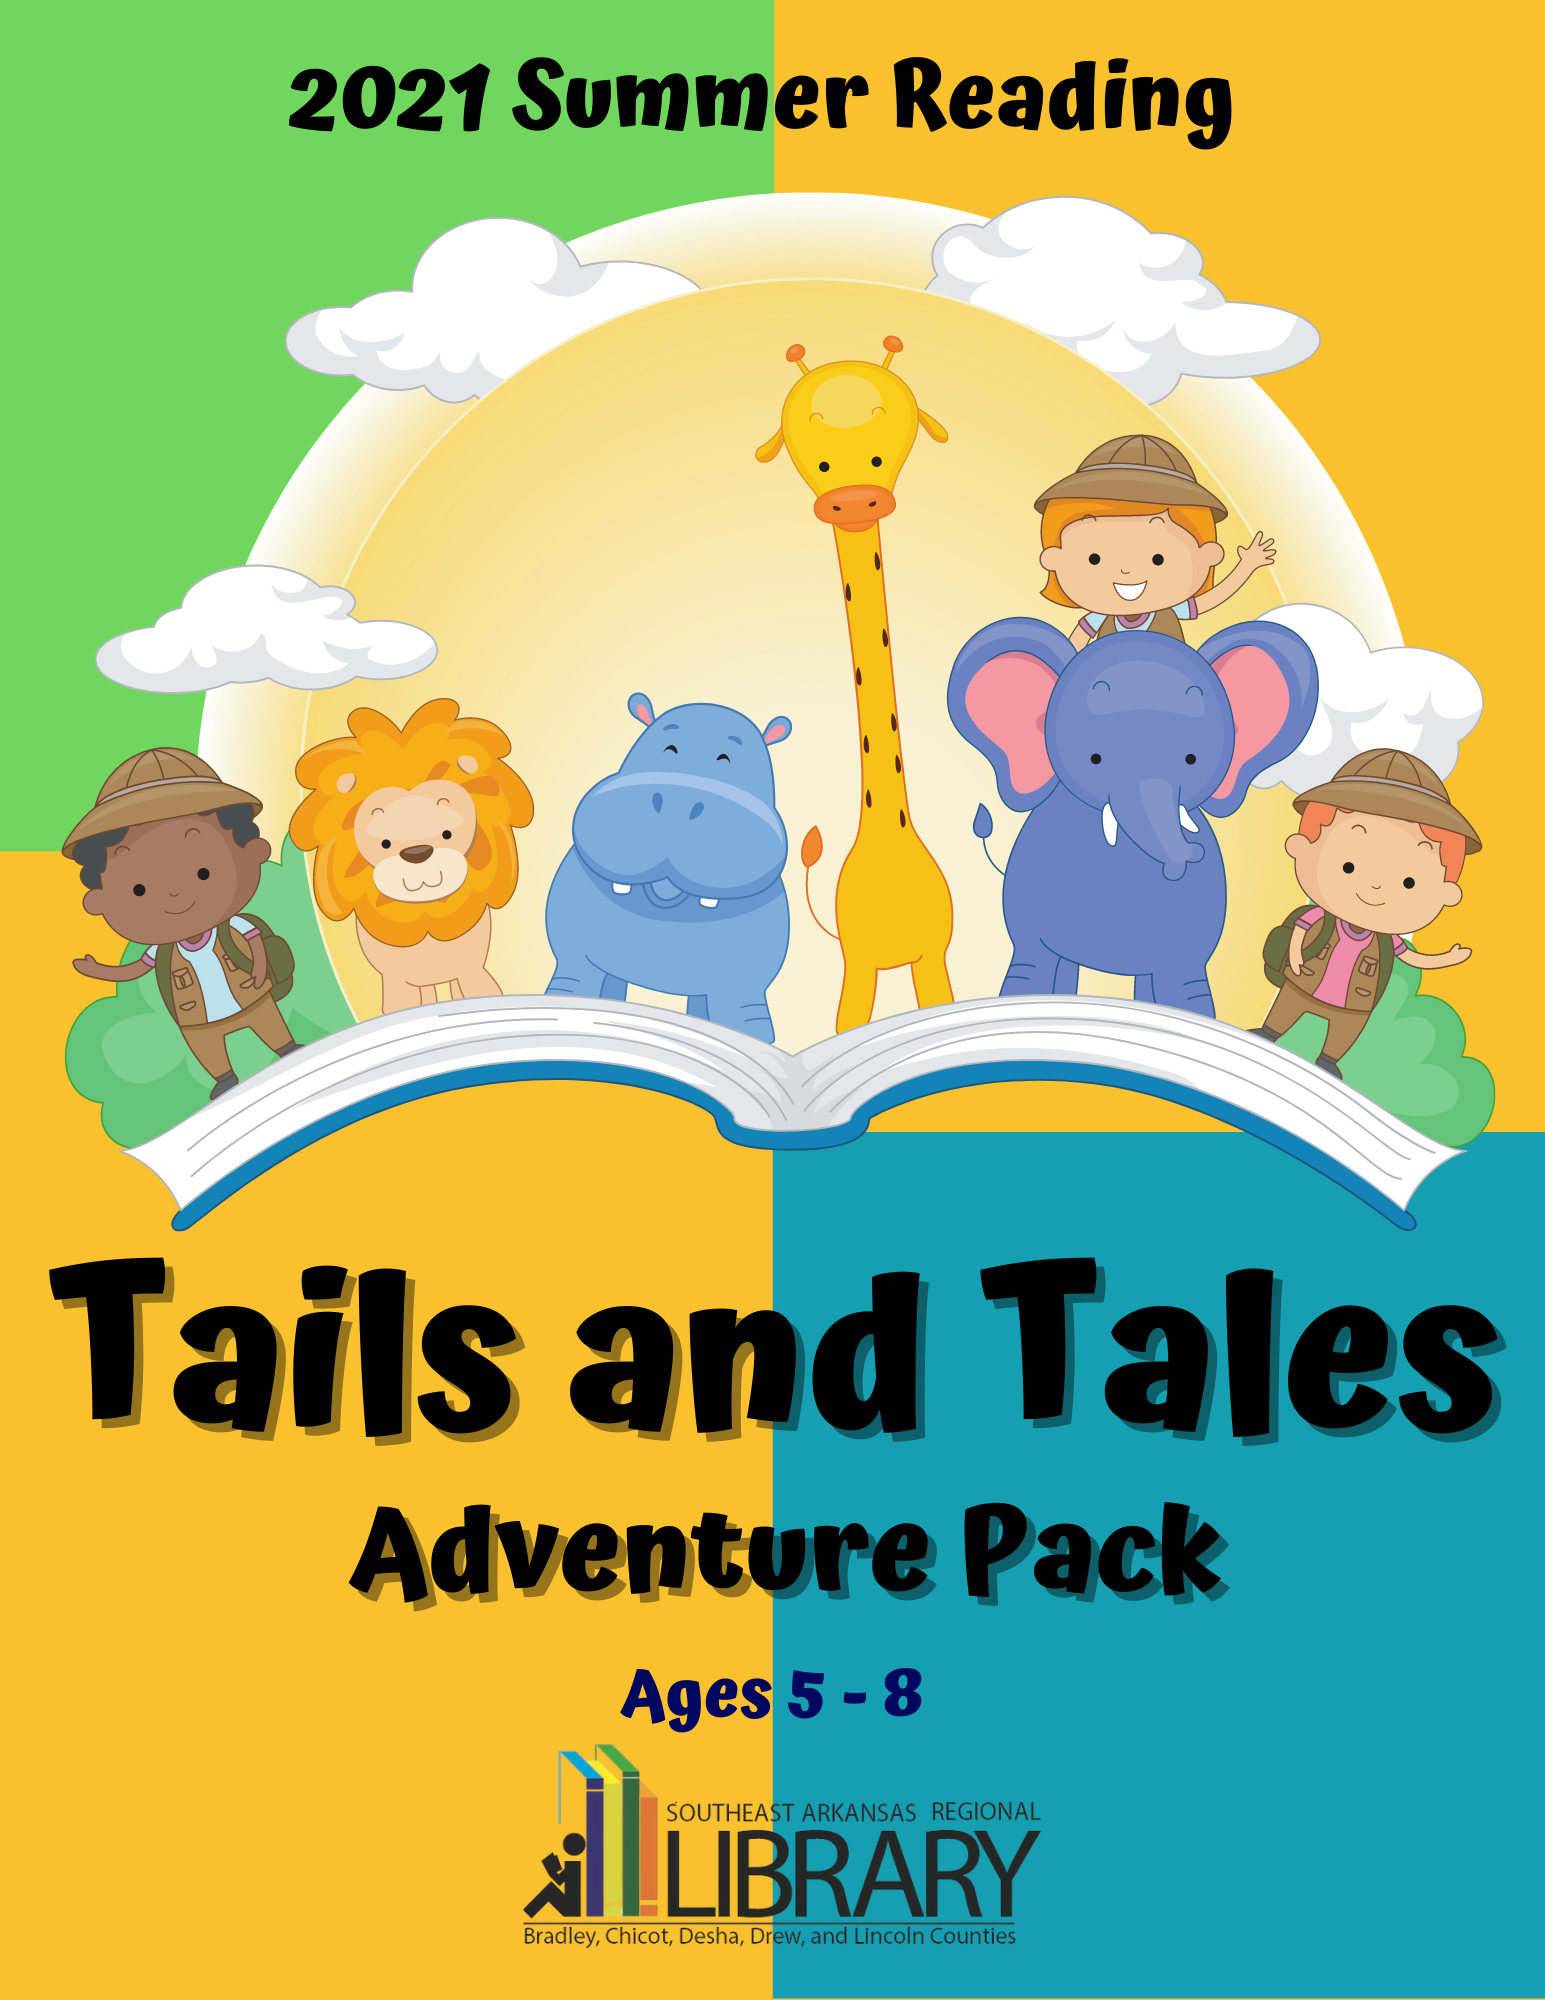 Tails and Tales Adventure Pack for Ages 5-8